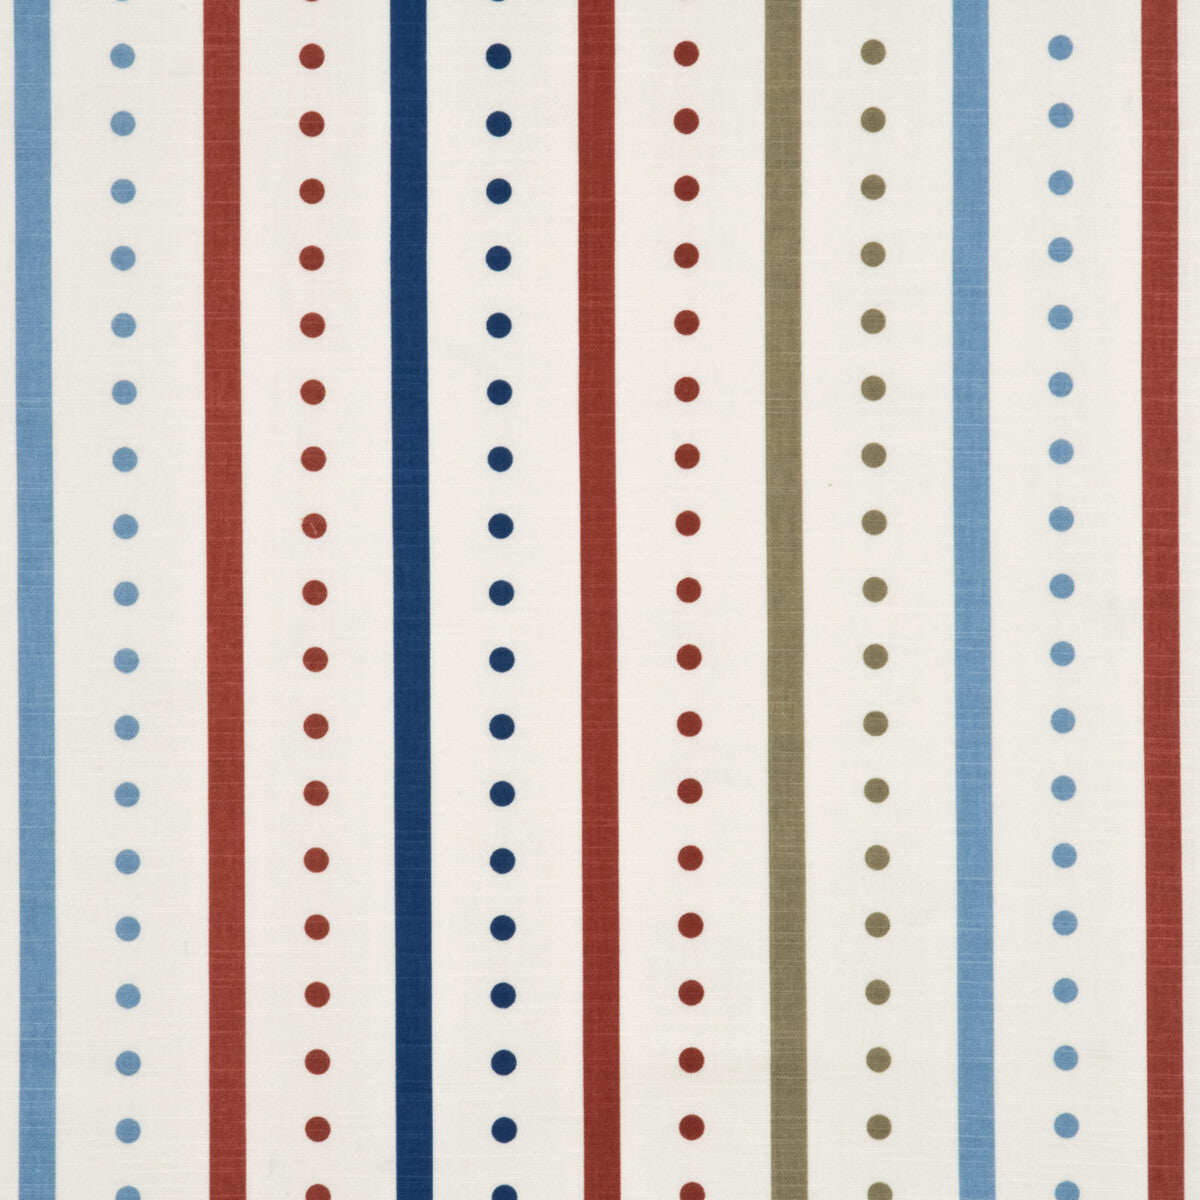 Opera Stripe fabric in red/blue color - pattern PP50344.4.0 - by Baker Lifestyle in the Opera Garden collection